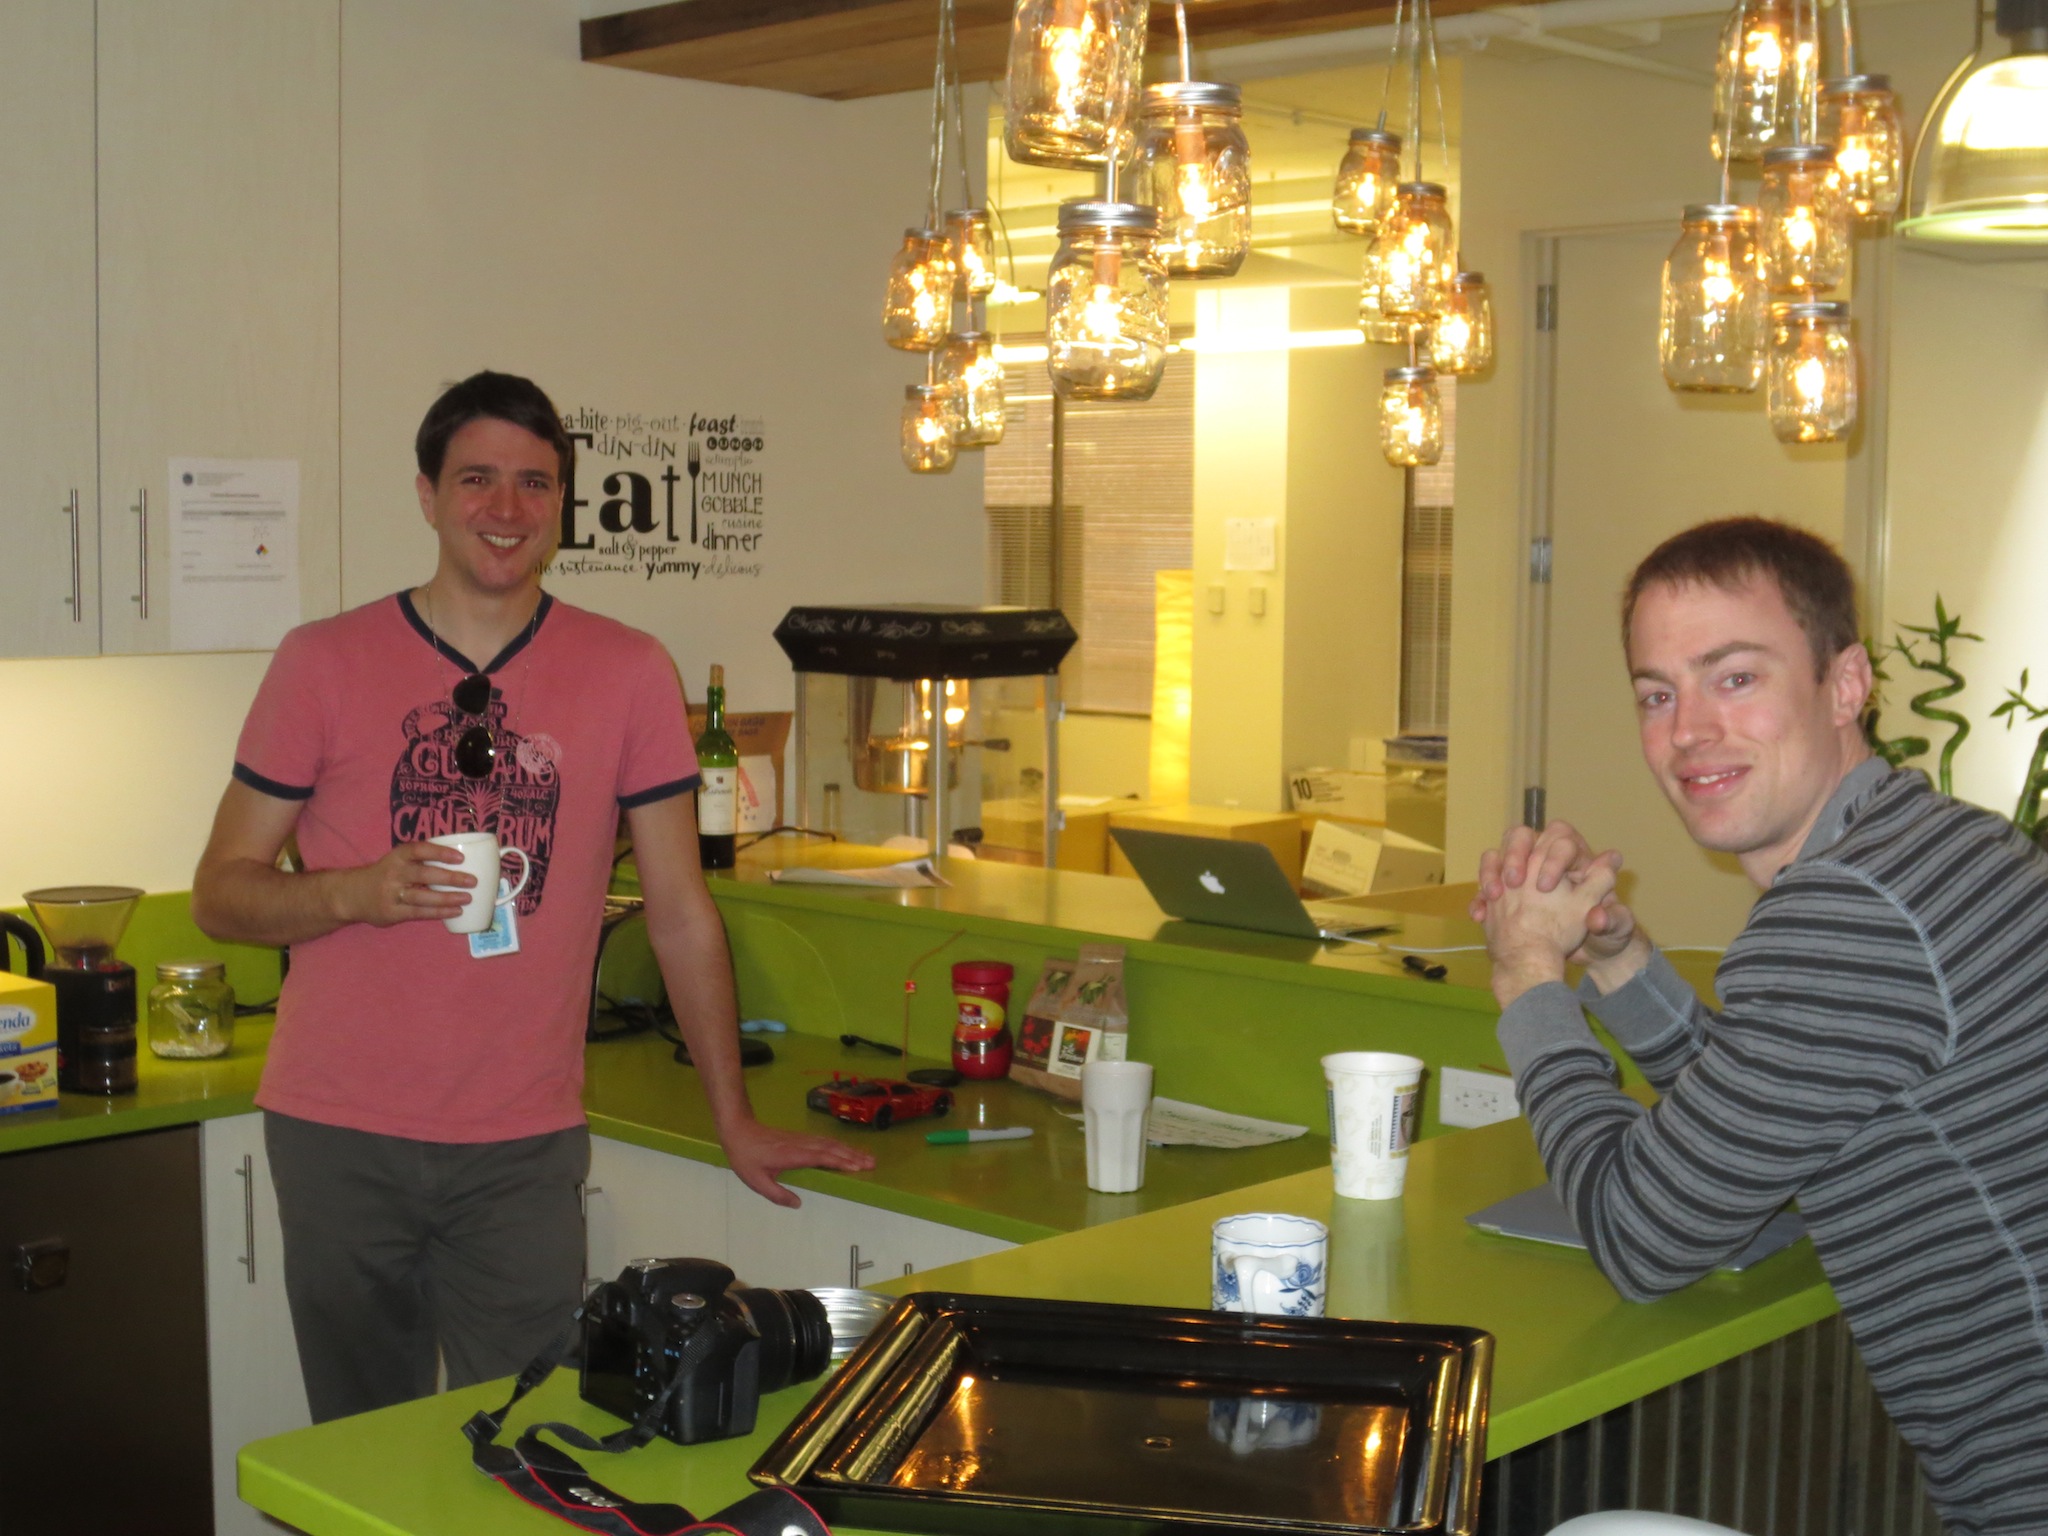 Josh and Ryan in the kitchen area of SocialCode's office